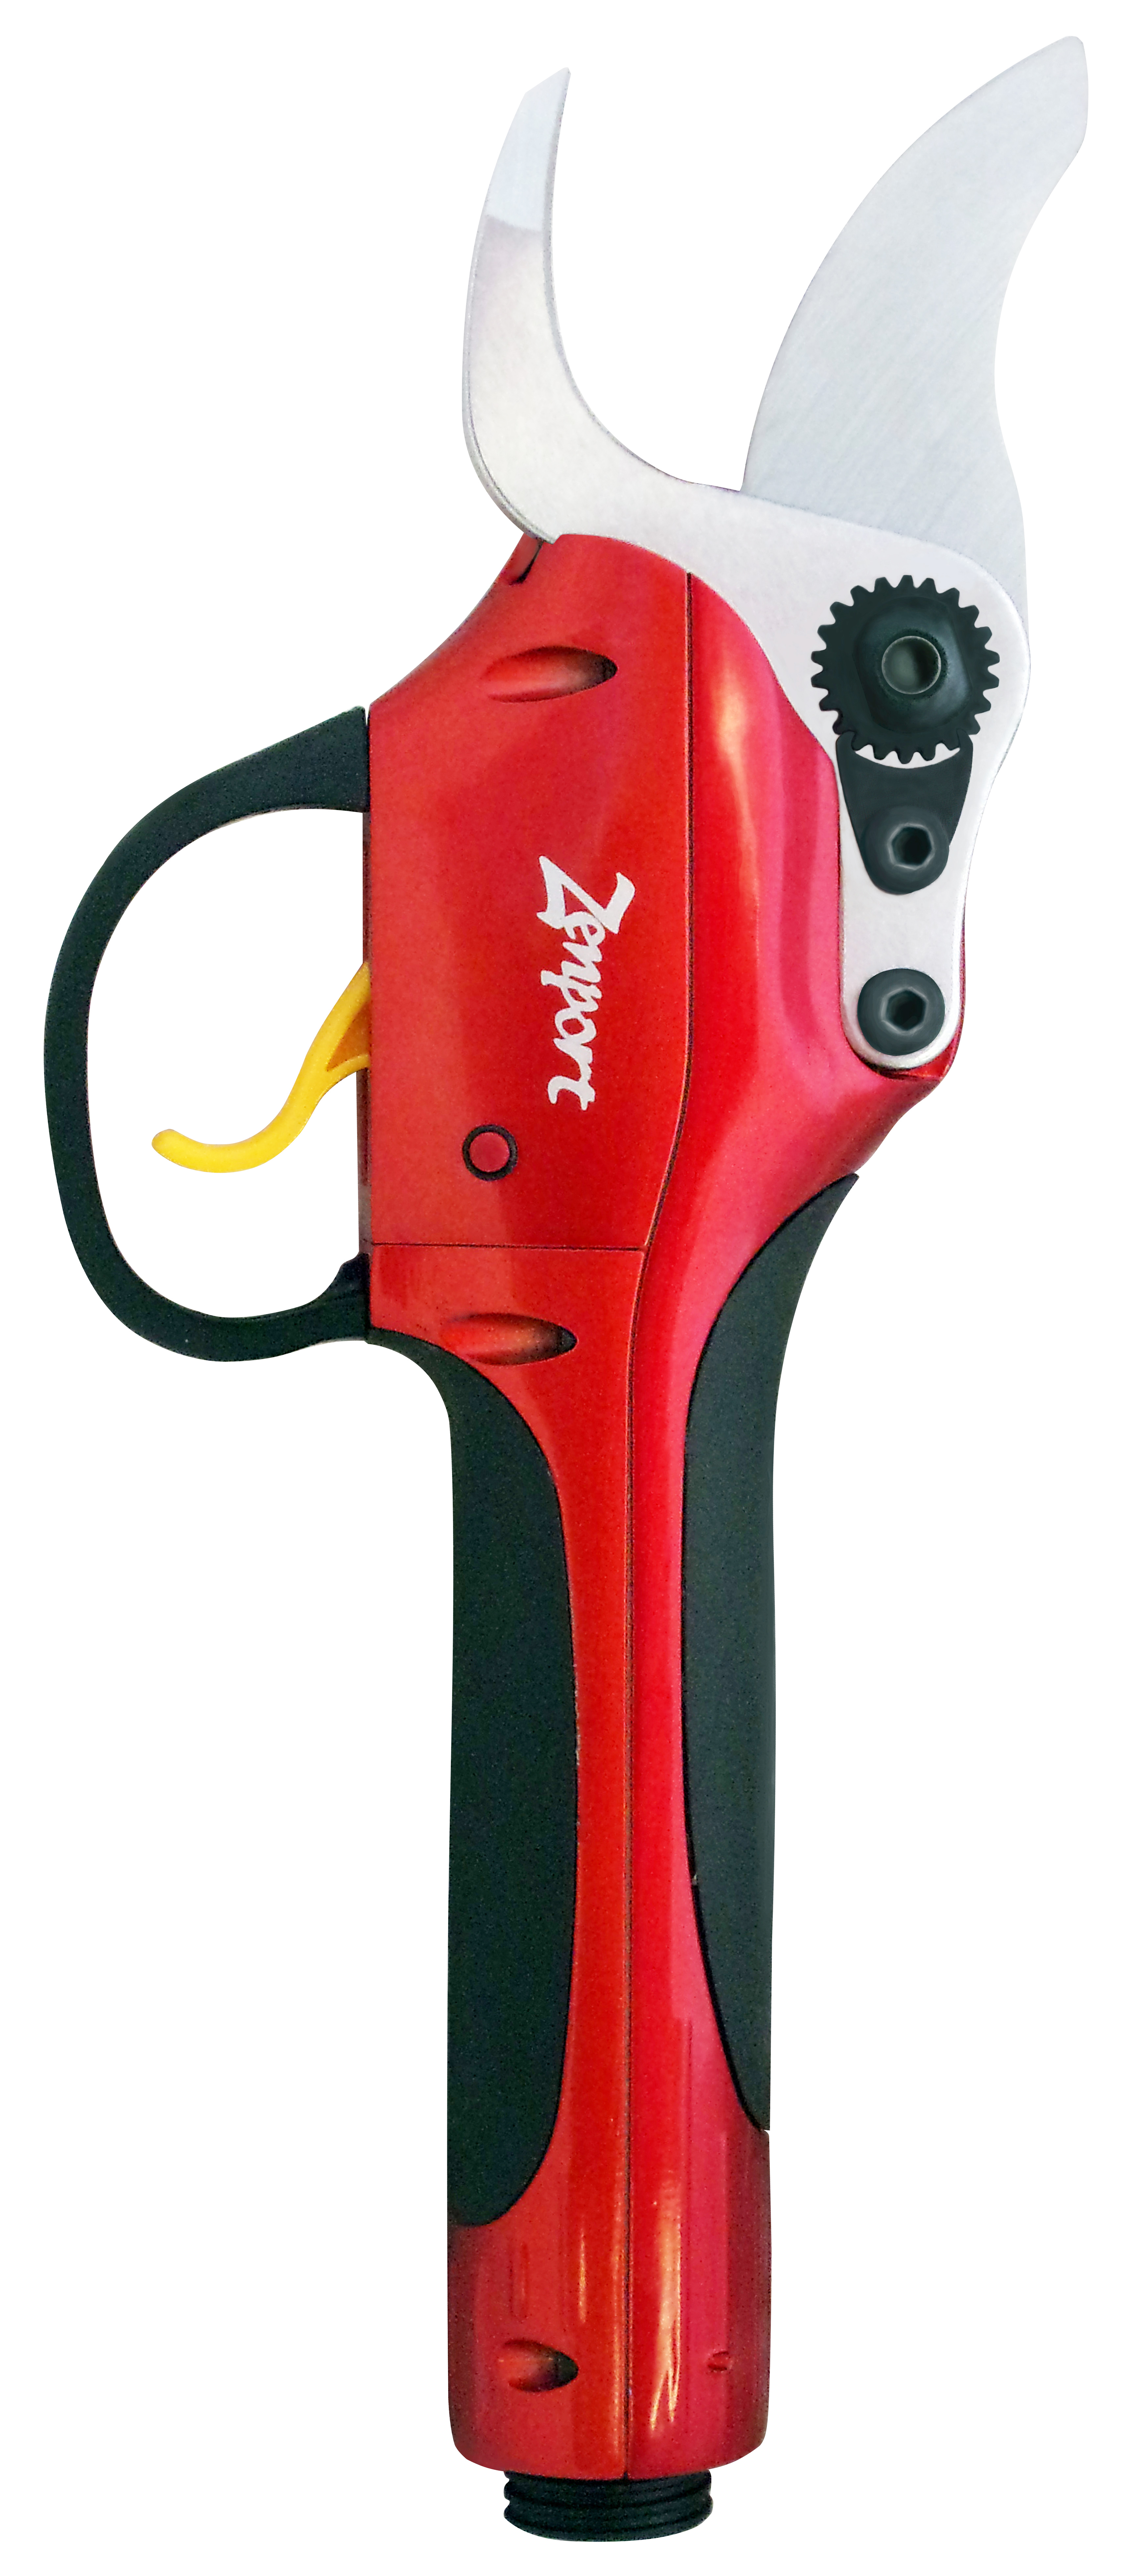 Zenport EP3 Large EPruner Battery Powered Electric Pruner, 14-Hour, 17000 1.75 Inch Cuts, Red/Black 9-PIN